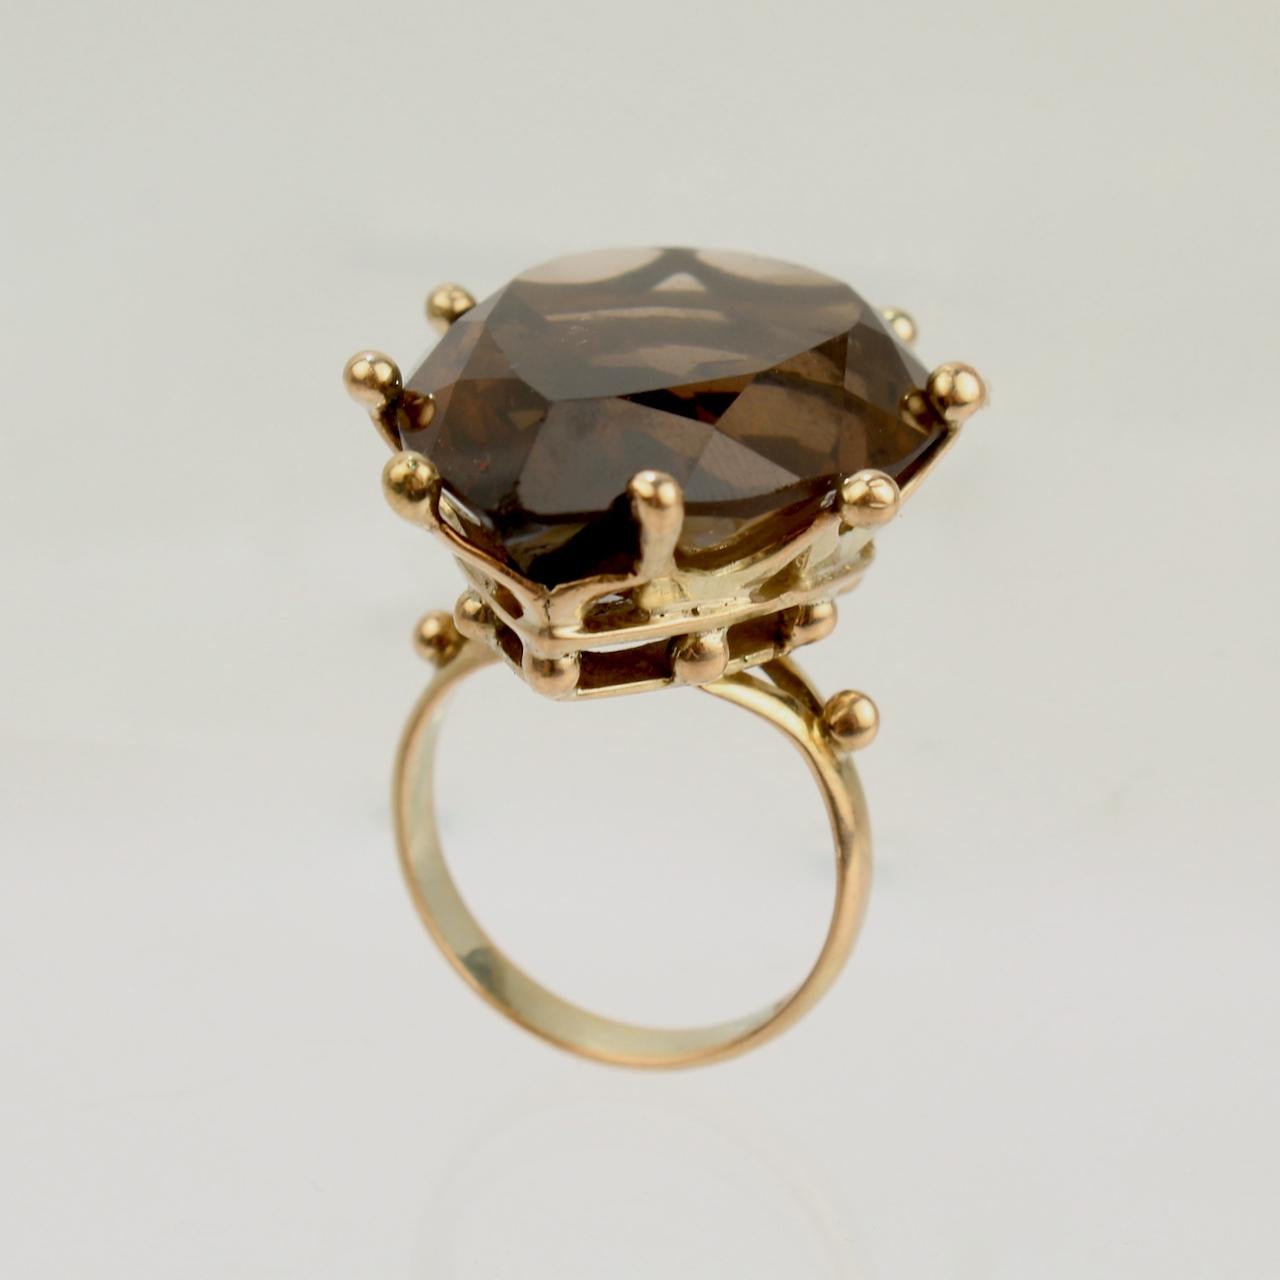 Smokey Quartz Vtg Jewelry 14k yellow Gold Cocktail Ring Faceted Stone 